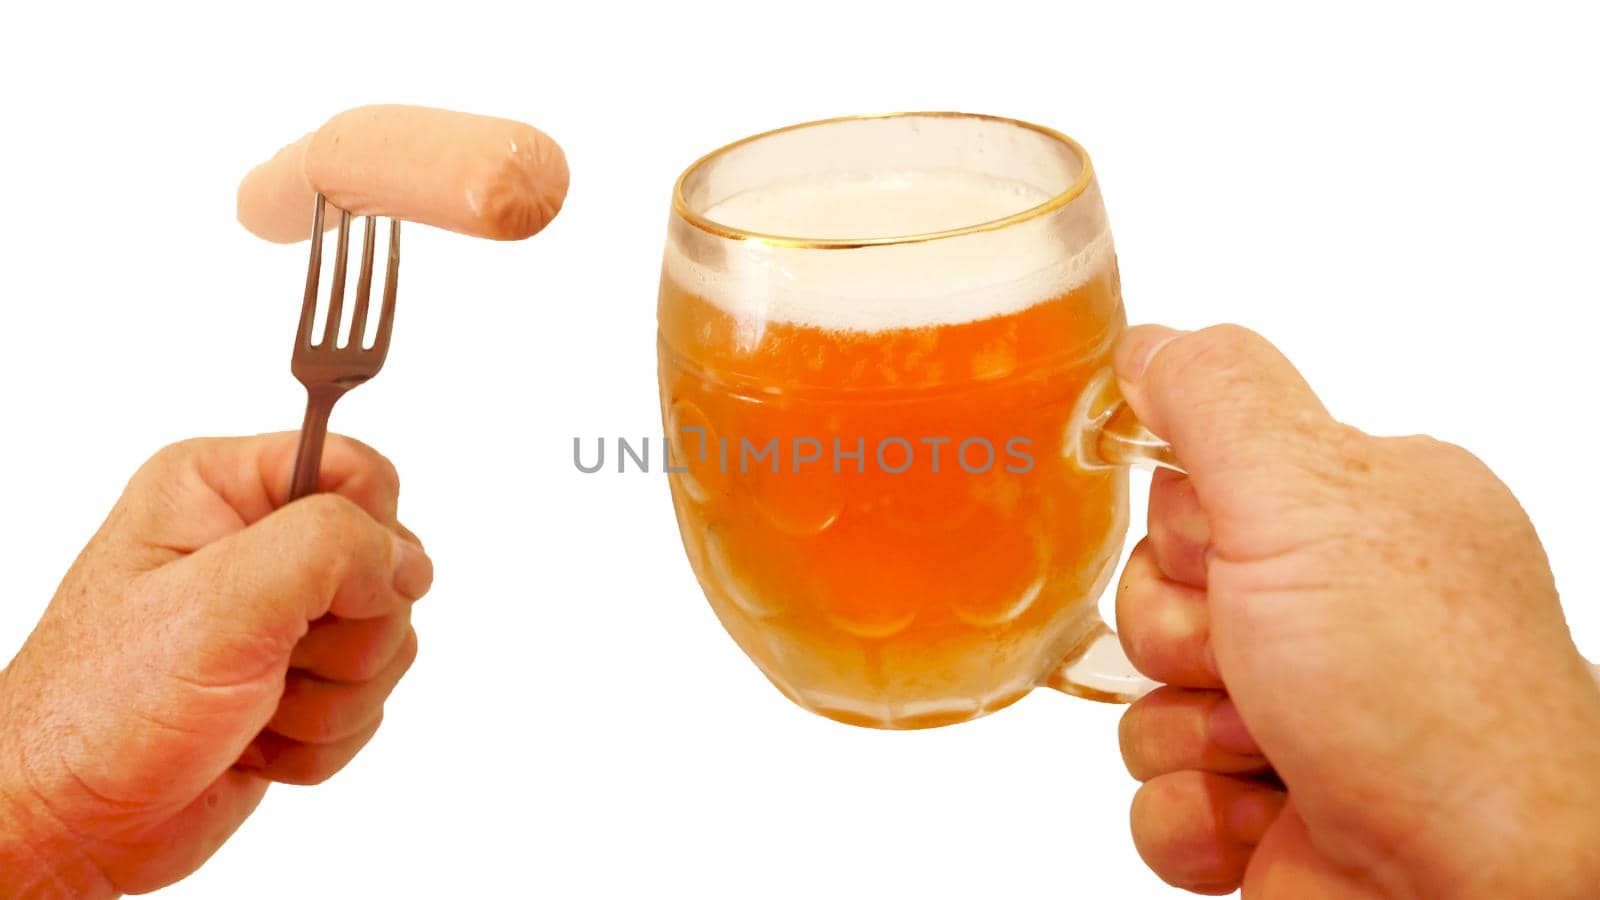 sausage on a fork and a mug of beer in male hands isolate on a white background by Annado